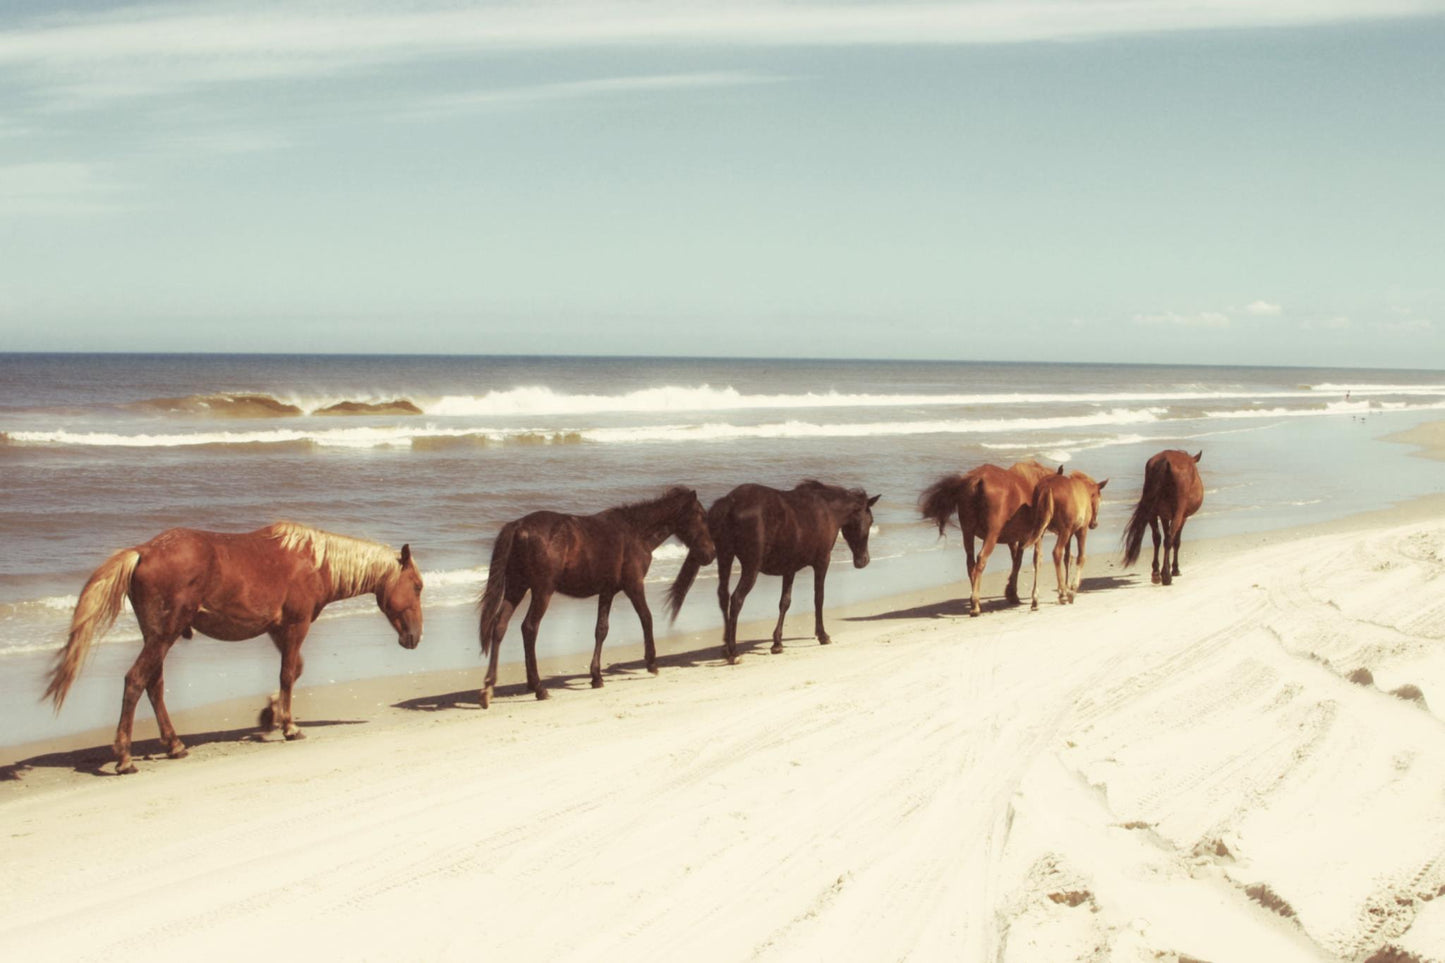 Framed Small - Horses On The Beach By Kathy Mansfield